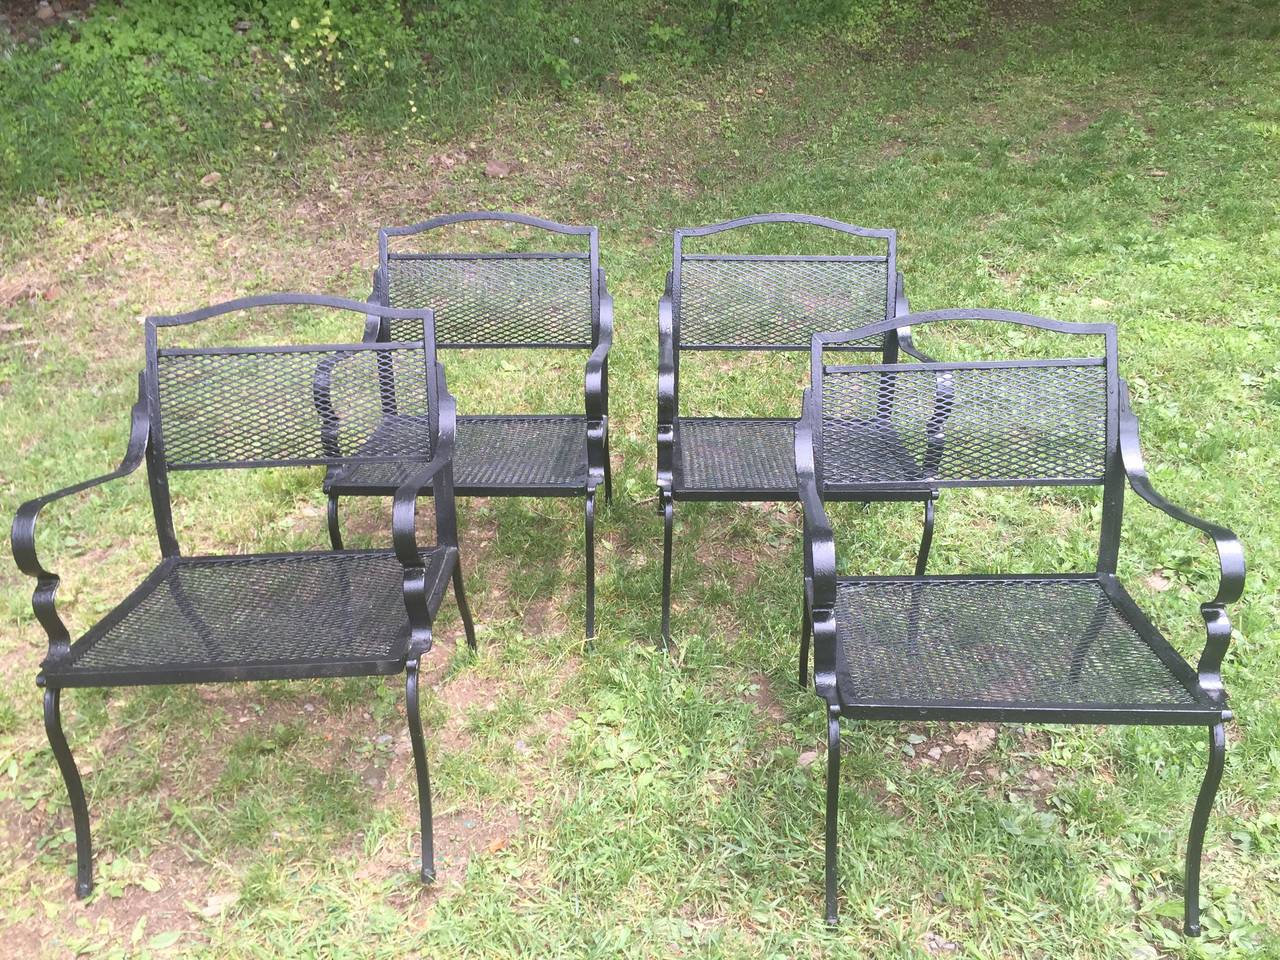 These Mid-Century Modern wrought iron garden chairs are solidly made in the style of Paul Follet and sport new black paint. Commodious seats make for hours of comfortable sitting on your terrace or around a dining table in the garden.